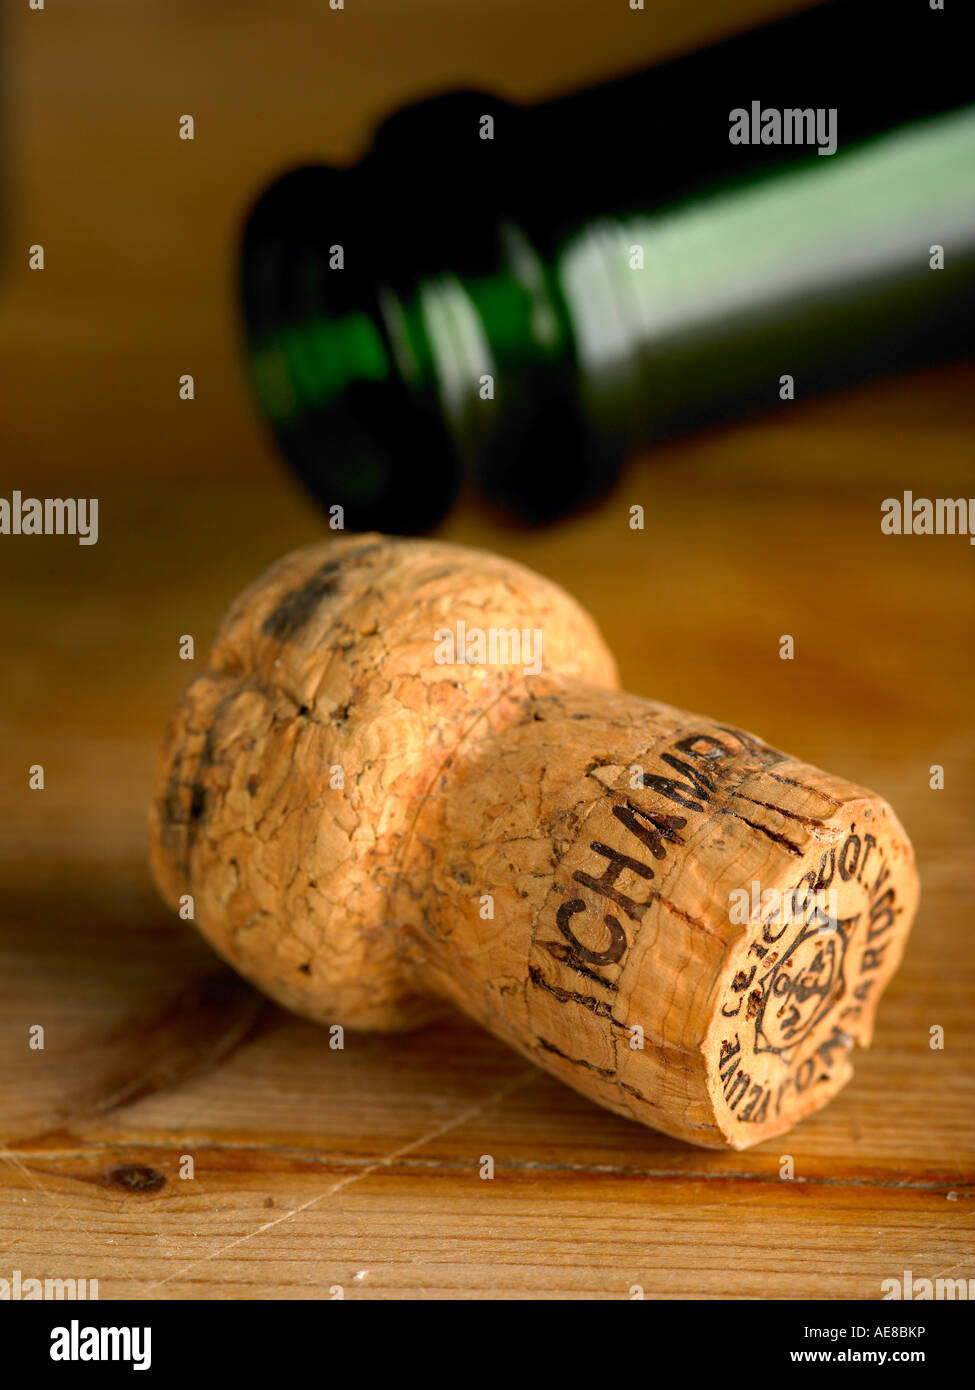 champagne cork stopper and bottle Stock Photo